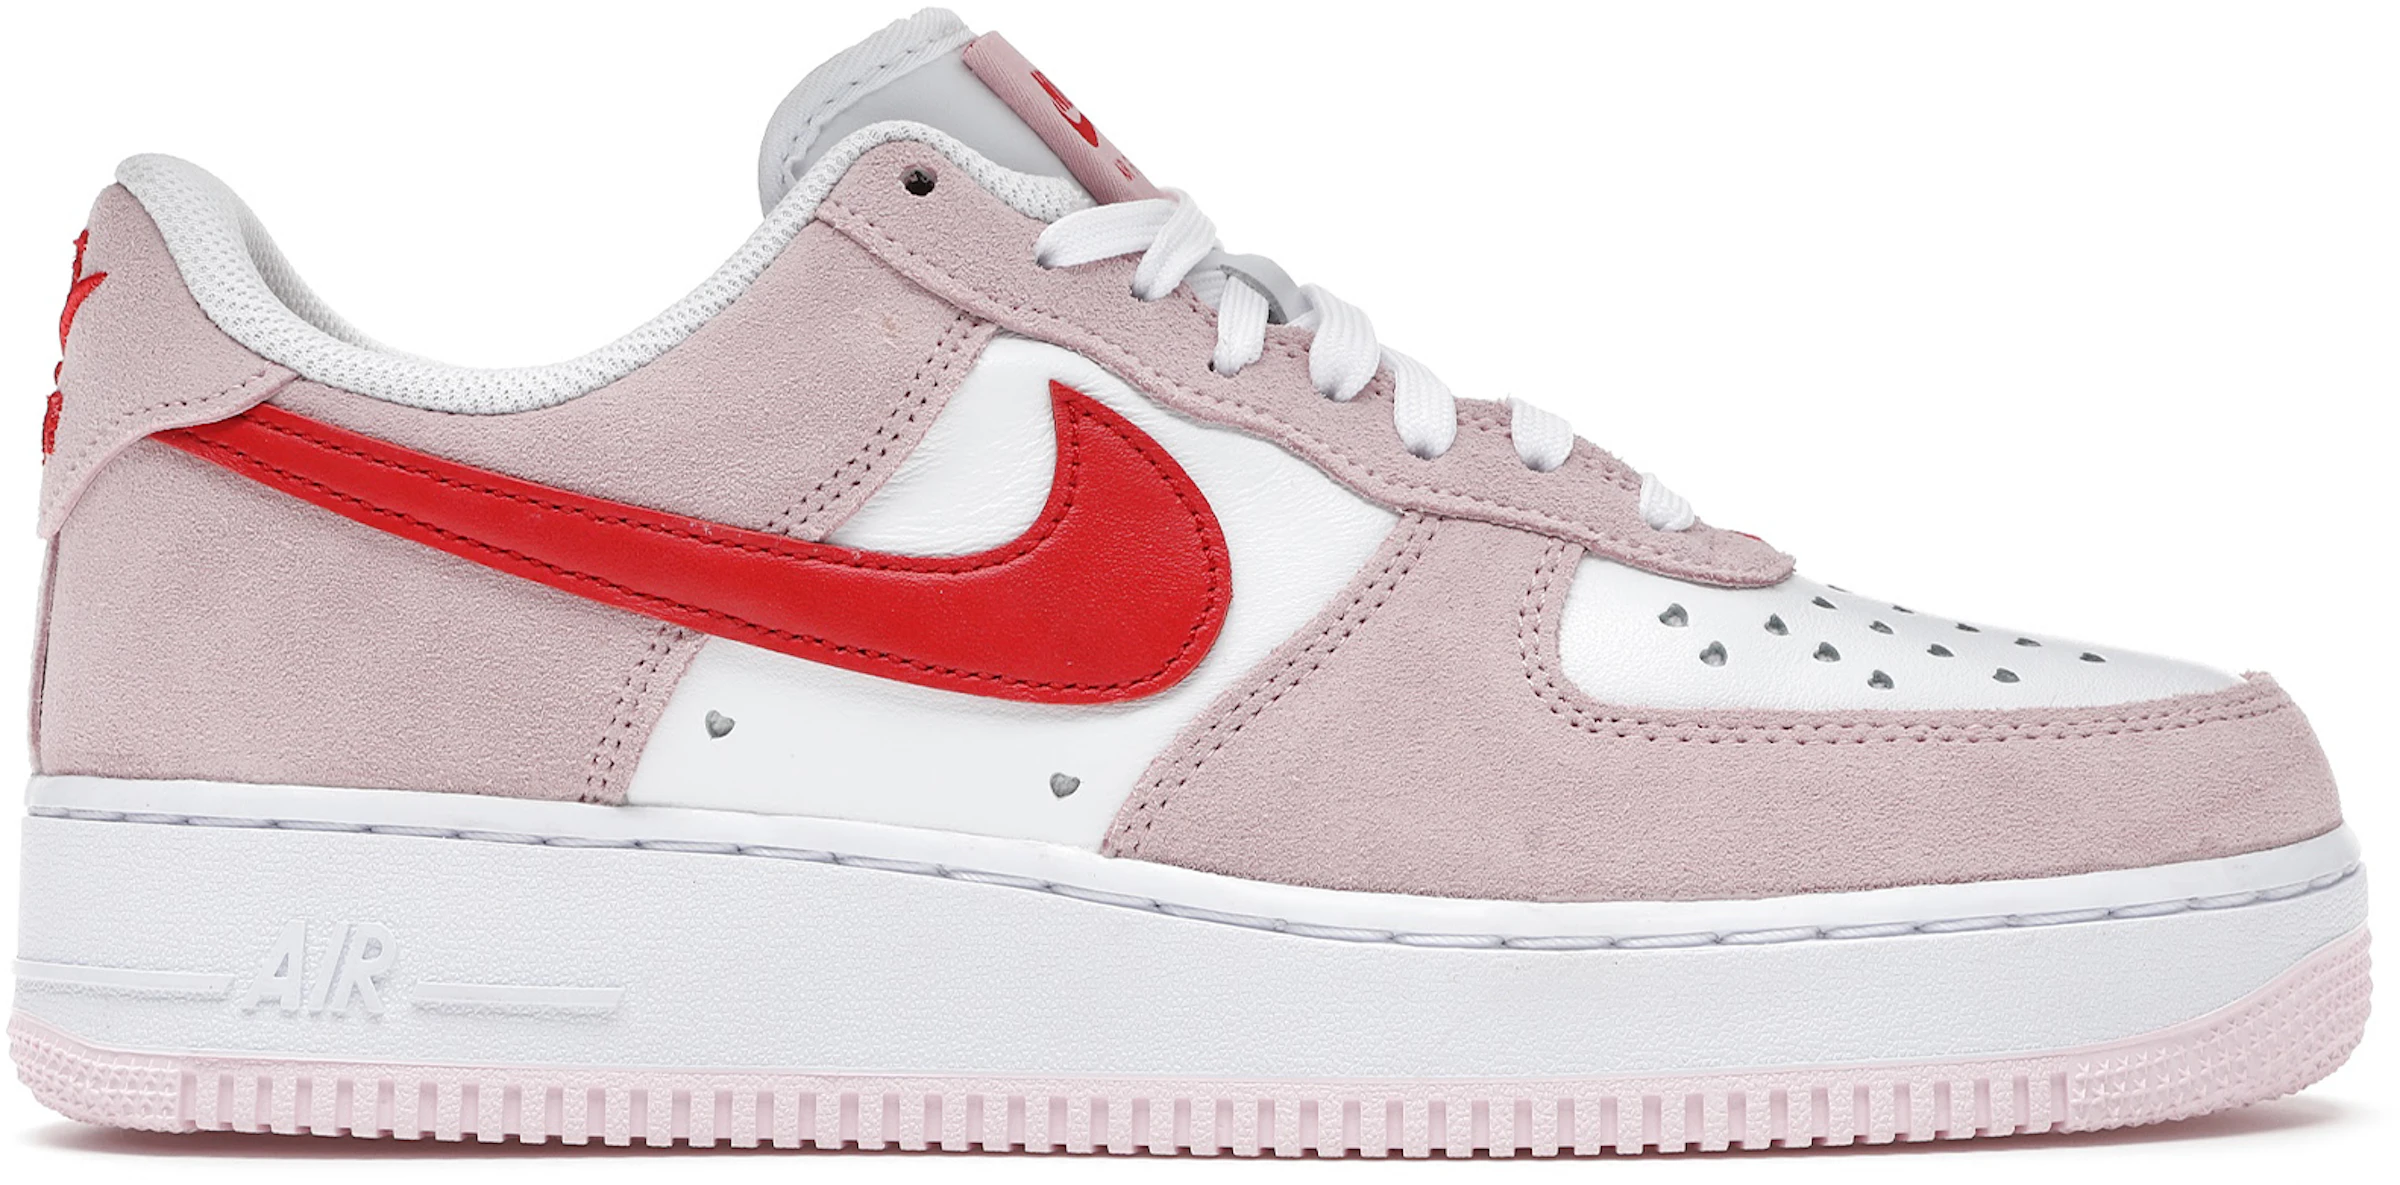 aves de corral Salvaje aventuras Nike Air Force 1 Low '07 QS Valentine's Day Love Letter - DD3384-600 - ES